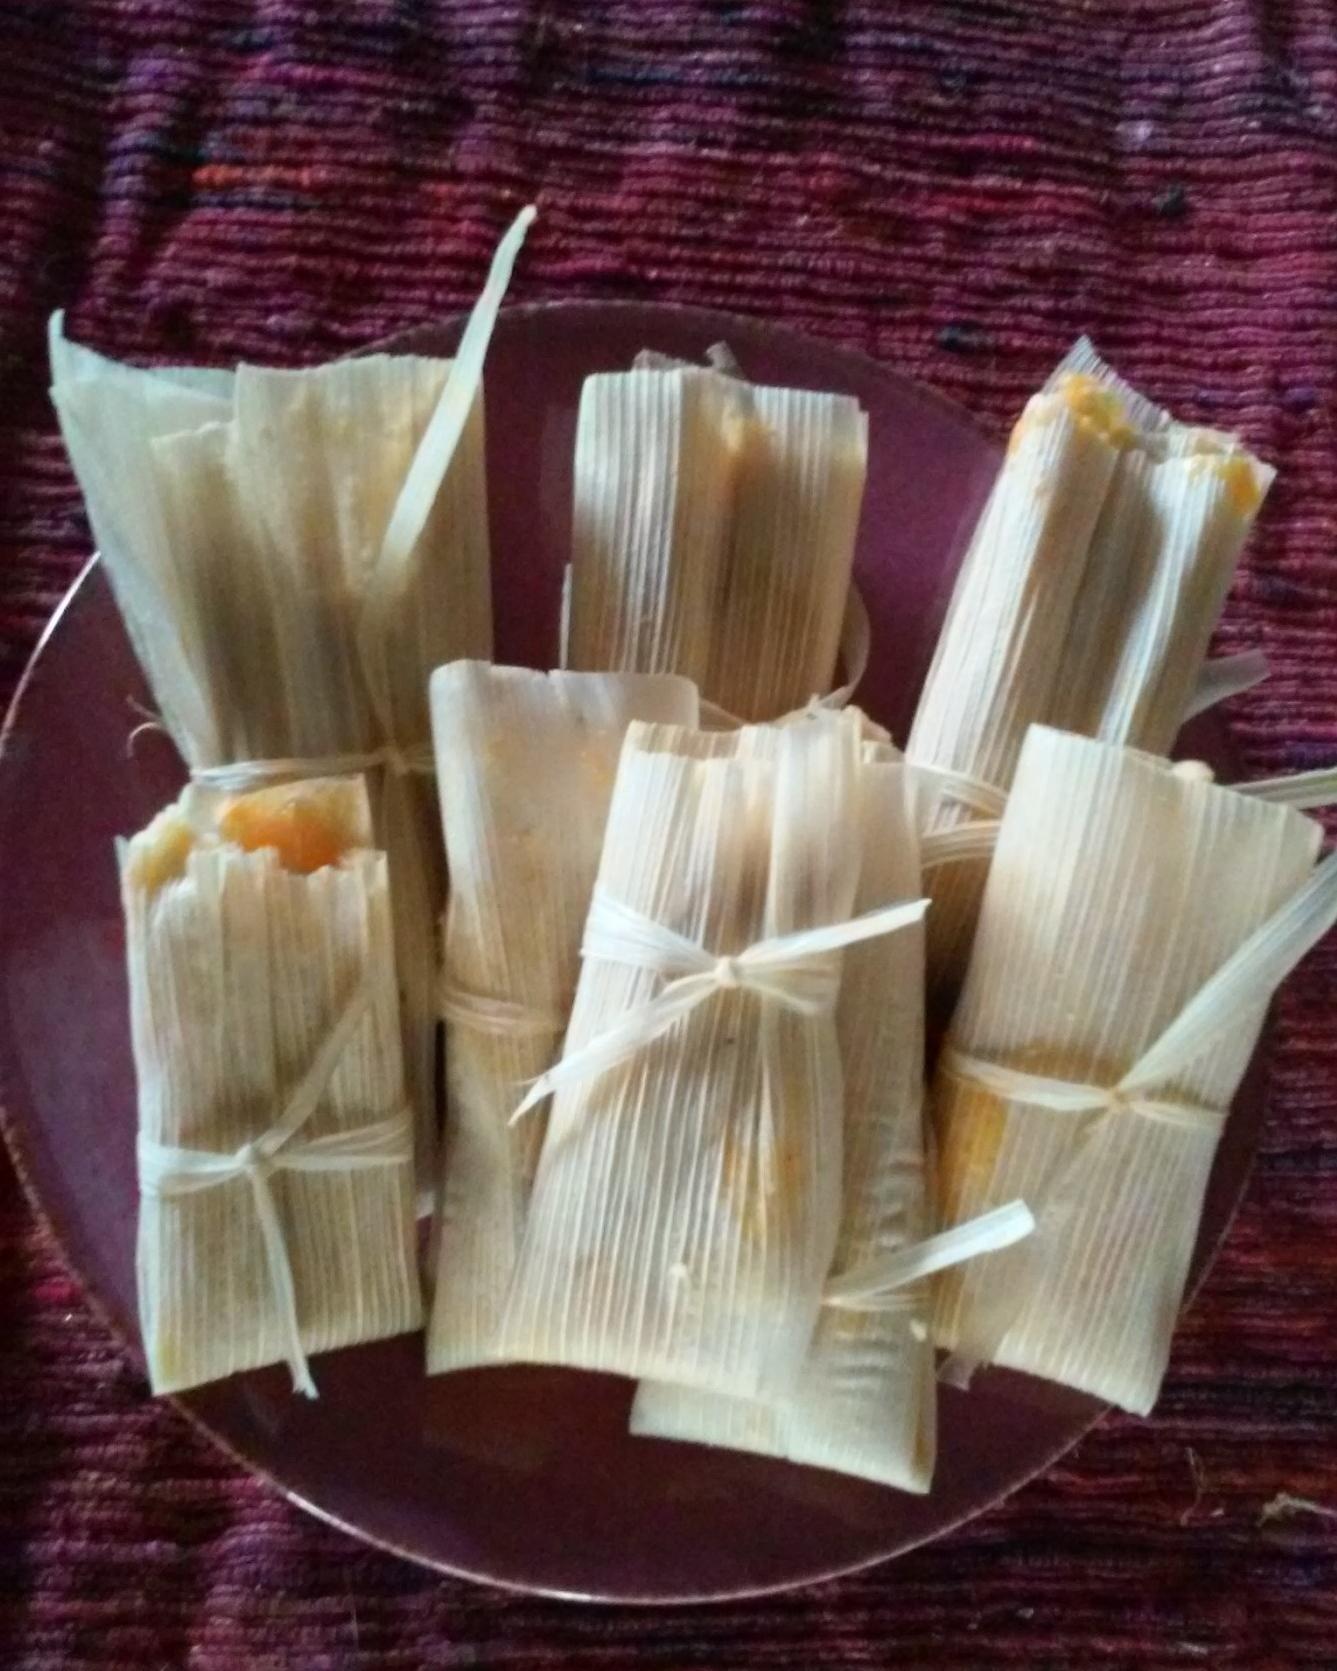  Grab a fork (or your hands) and dig into these yummy tamales.